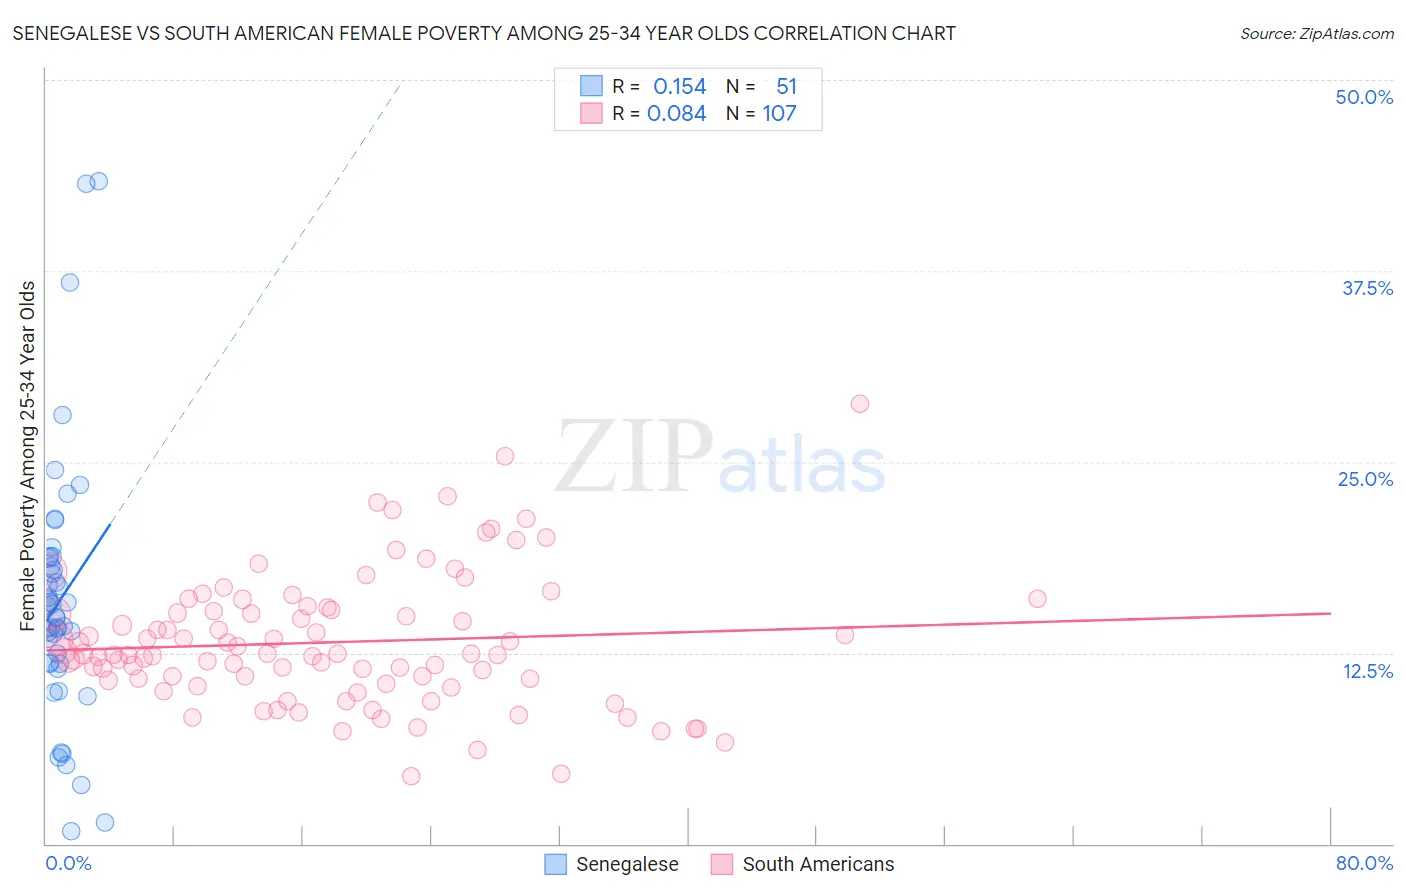 Senegalese vs South American Female Poverty Among 25-34 Year Olds